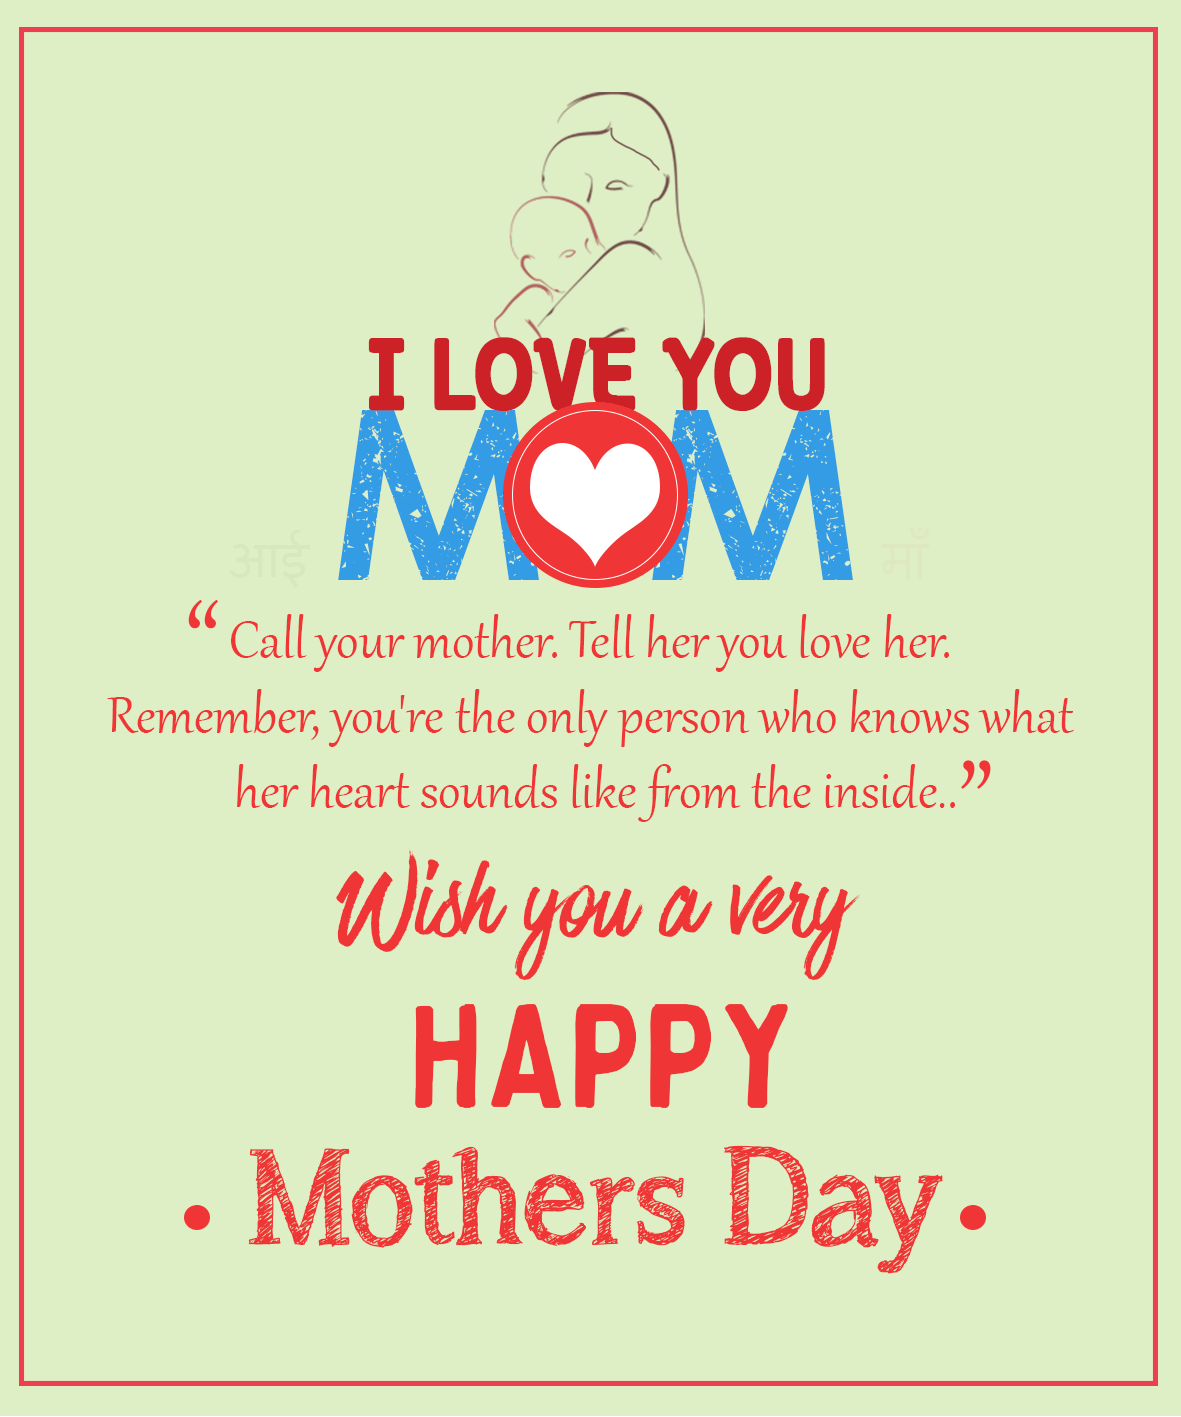 Mothers Day | eGreetings Portal